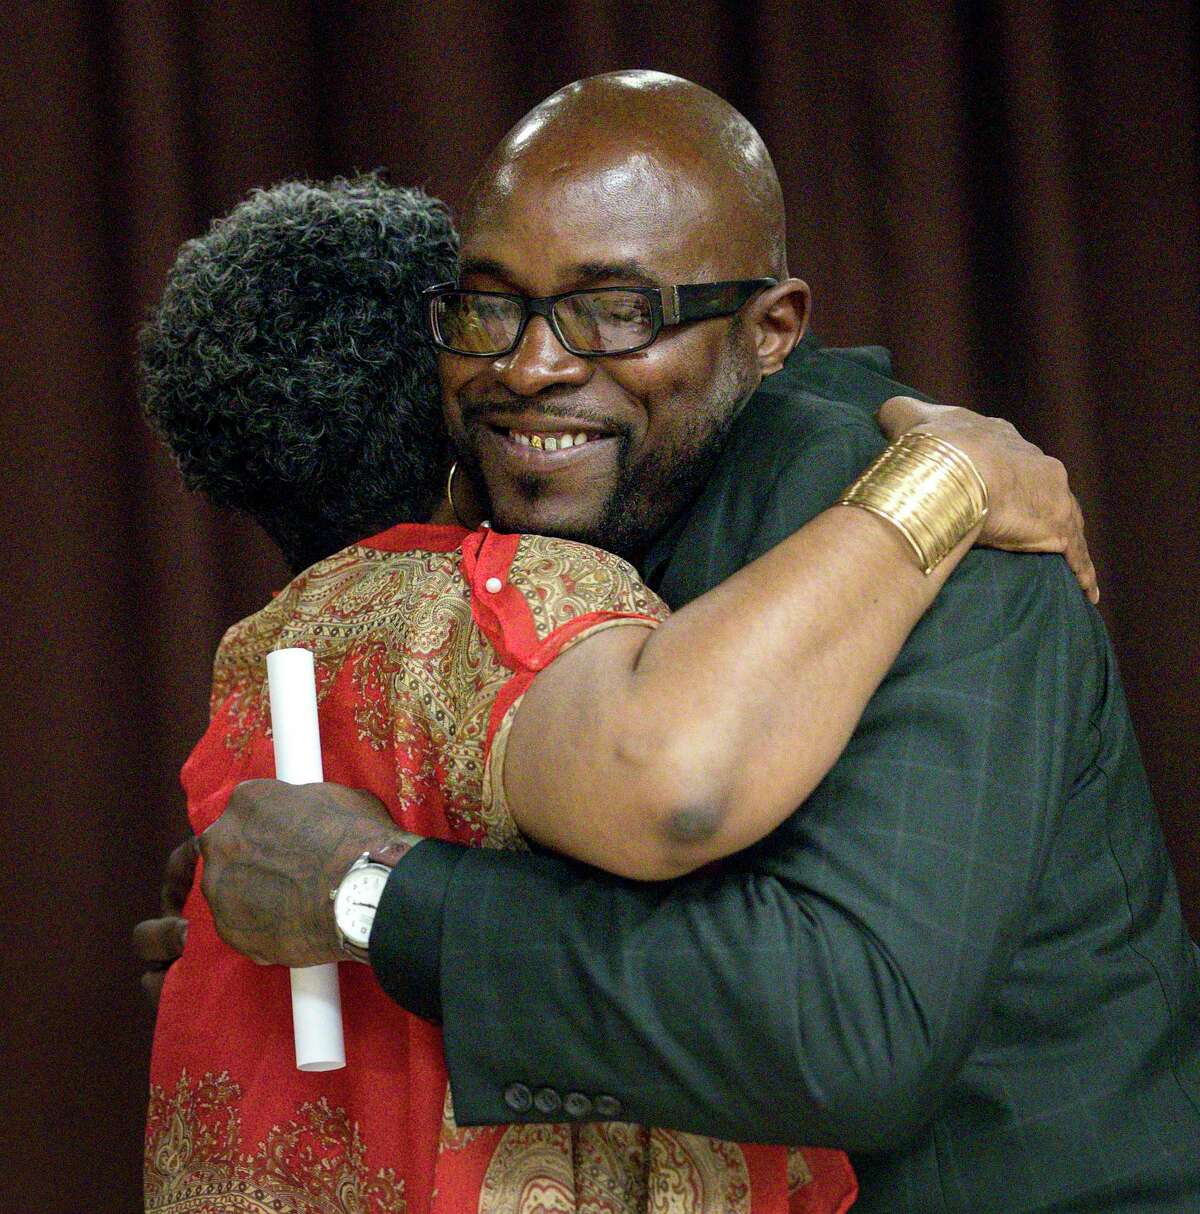 Joseph Dowell, right, also known as "Unc," hugs Jennifer Herring, director of re-entry services at the Harris County Sheriff's Office, during a graduation ceremony for the Community Re-Entry Network Program, Thursday, May 18, 2017, in Houston. While in jail, Dowell was part of the "Freedom Project," which aims to help inmates struggling with addiction. After his release, he began working with the CRNP, and he will start a job with the City of Houston in a few weeks. ( Jon Shapley / Houston Chronicle )